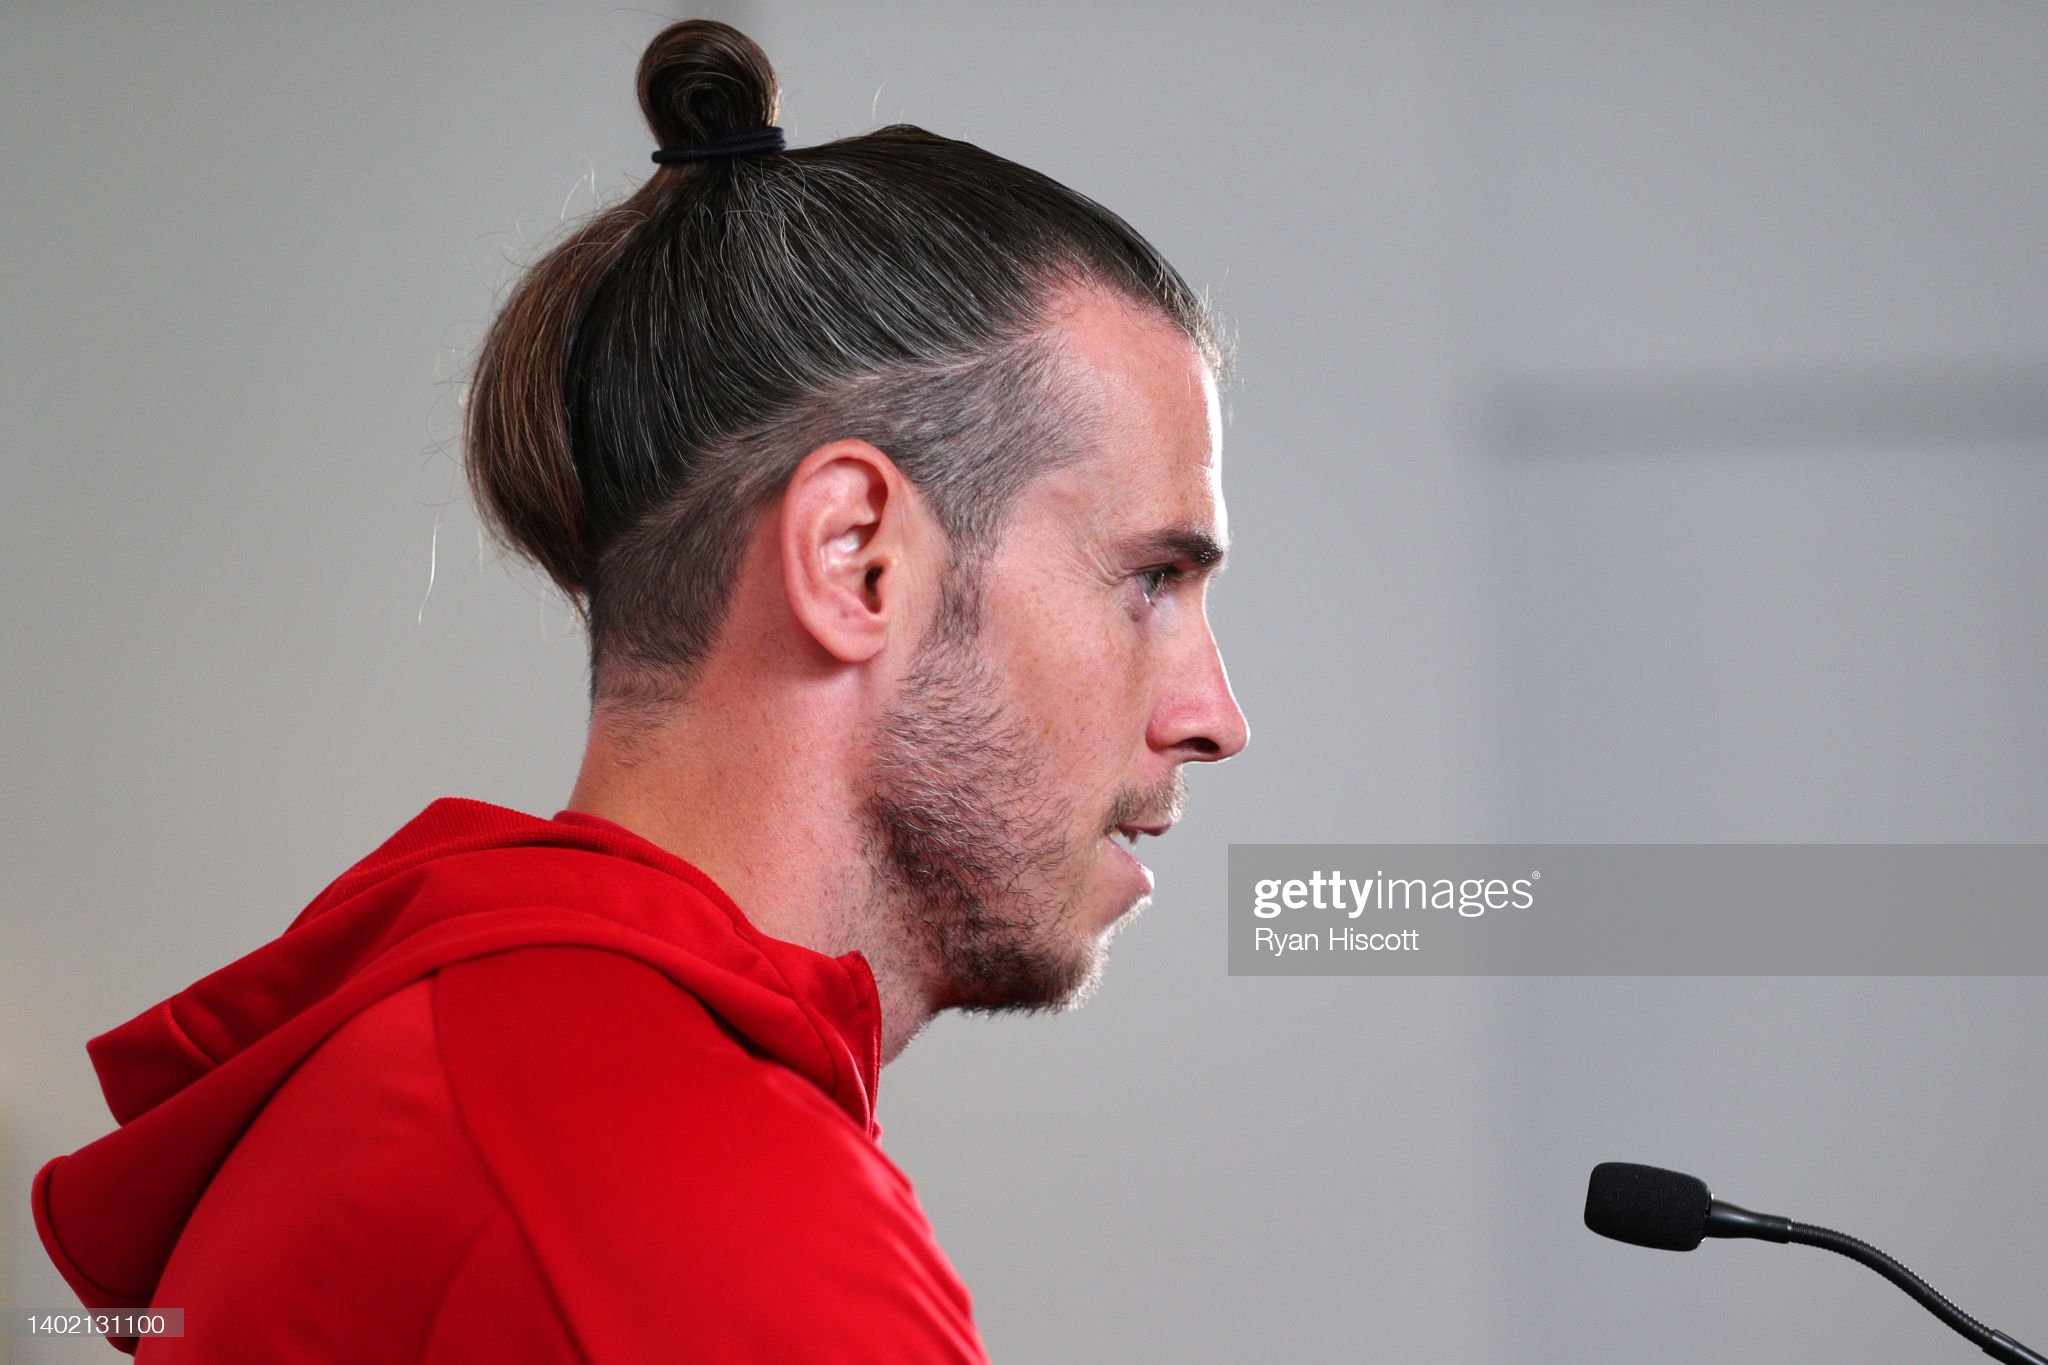 Gareth Bale Bored By Football v Rugby Debate in Wales . . . He Wants Every  Single Welsh Sport To Be Up With The Best - Dai Sport